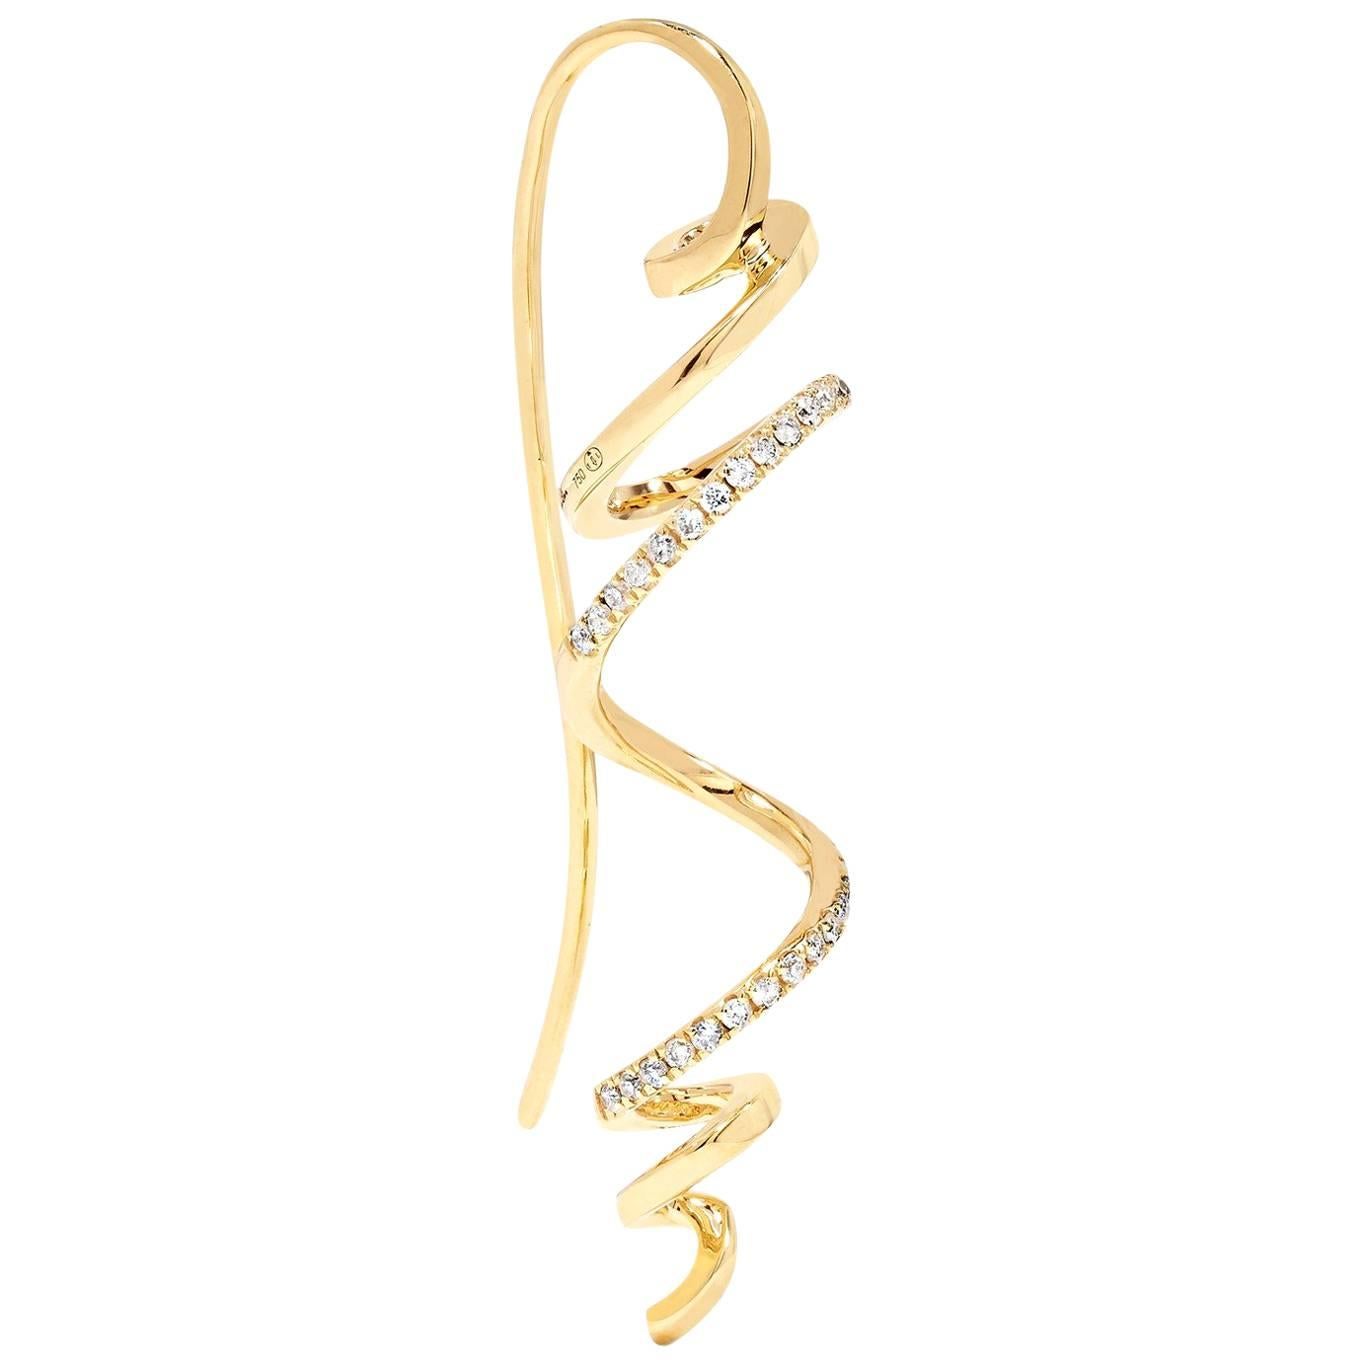 Yvonne Leon's Earring in Yellow Gold 18 Carat with Diamonds